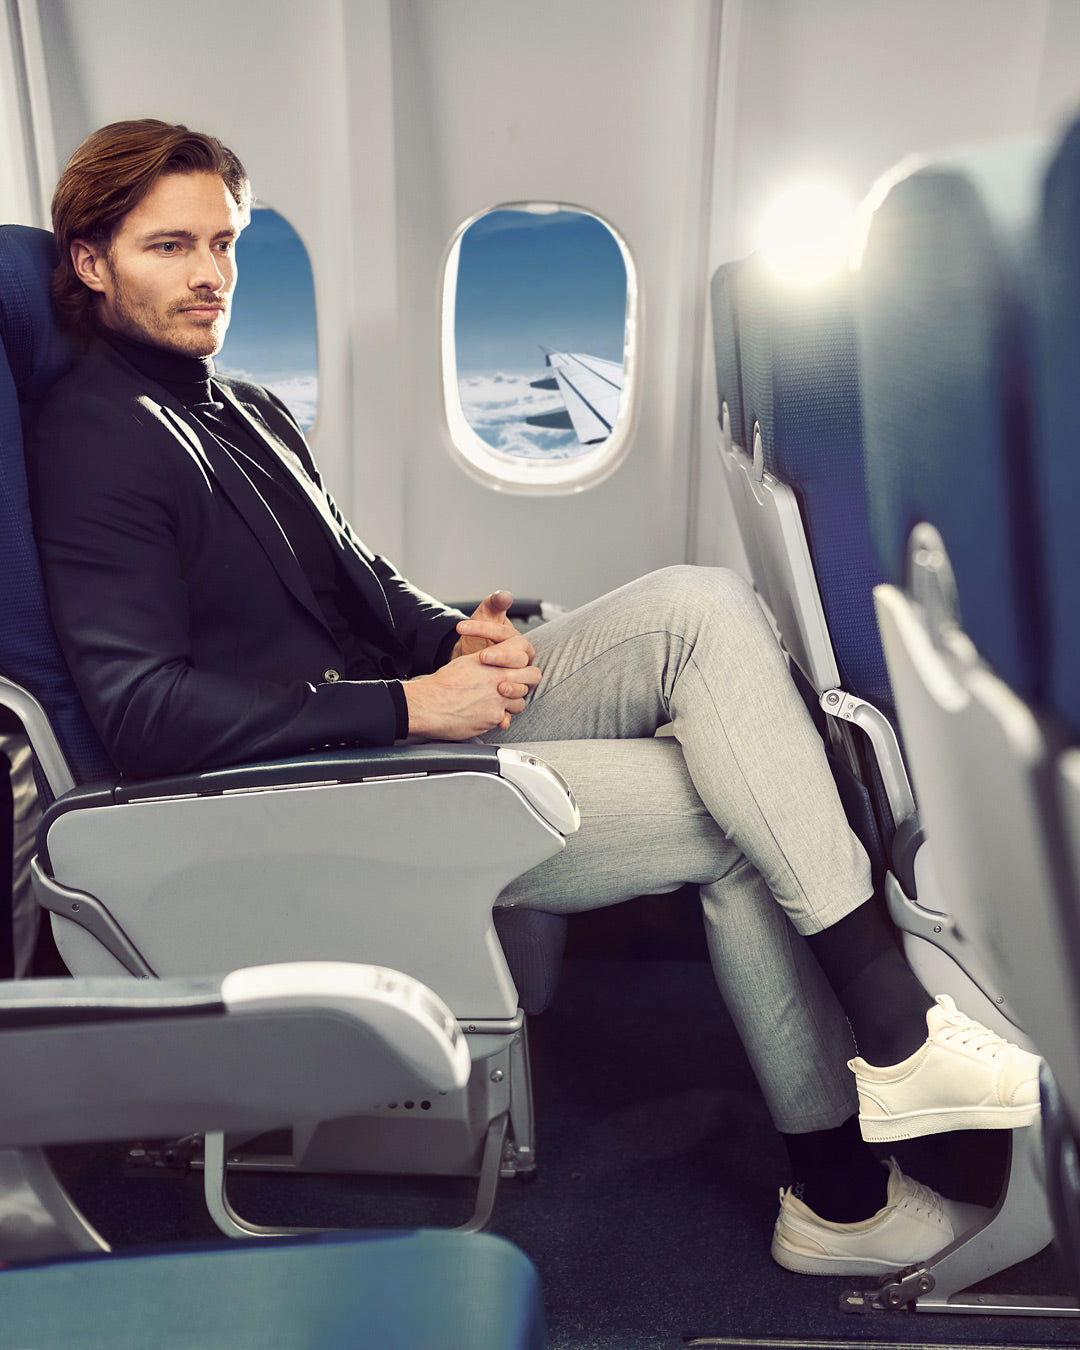 Men sitting in a airplane with compression socks.